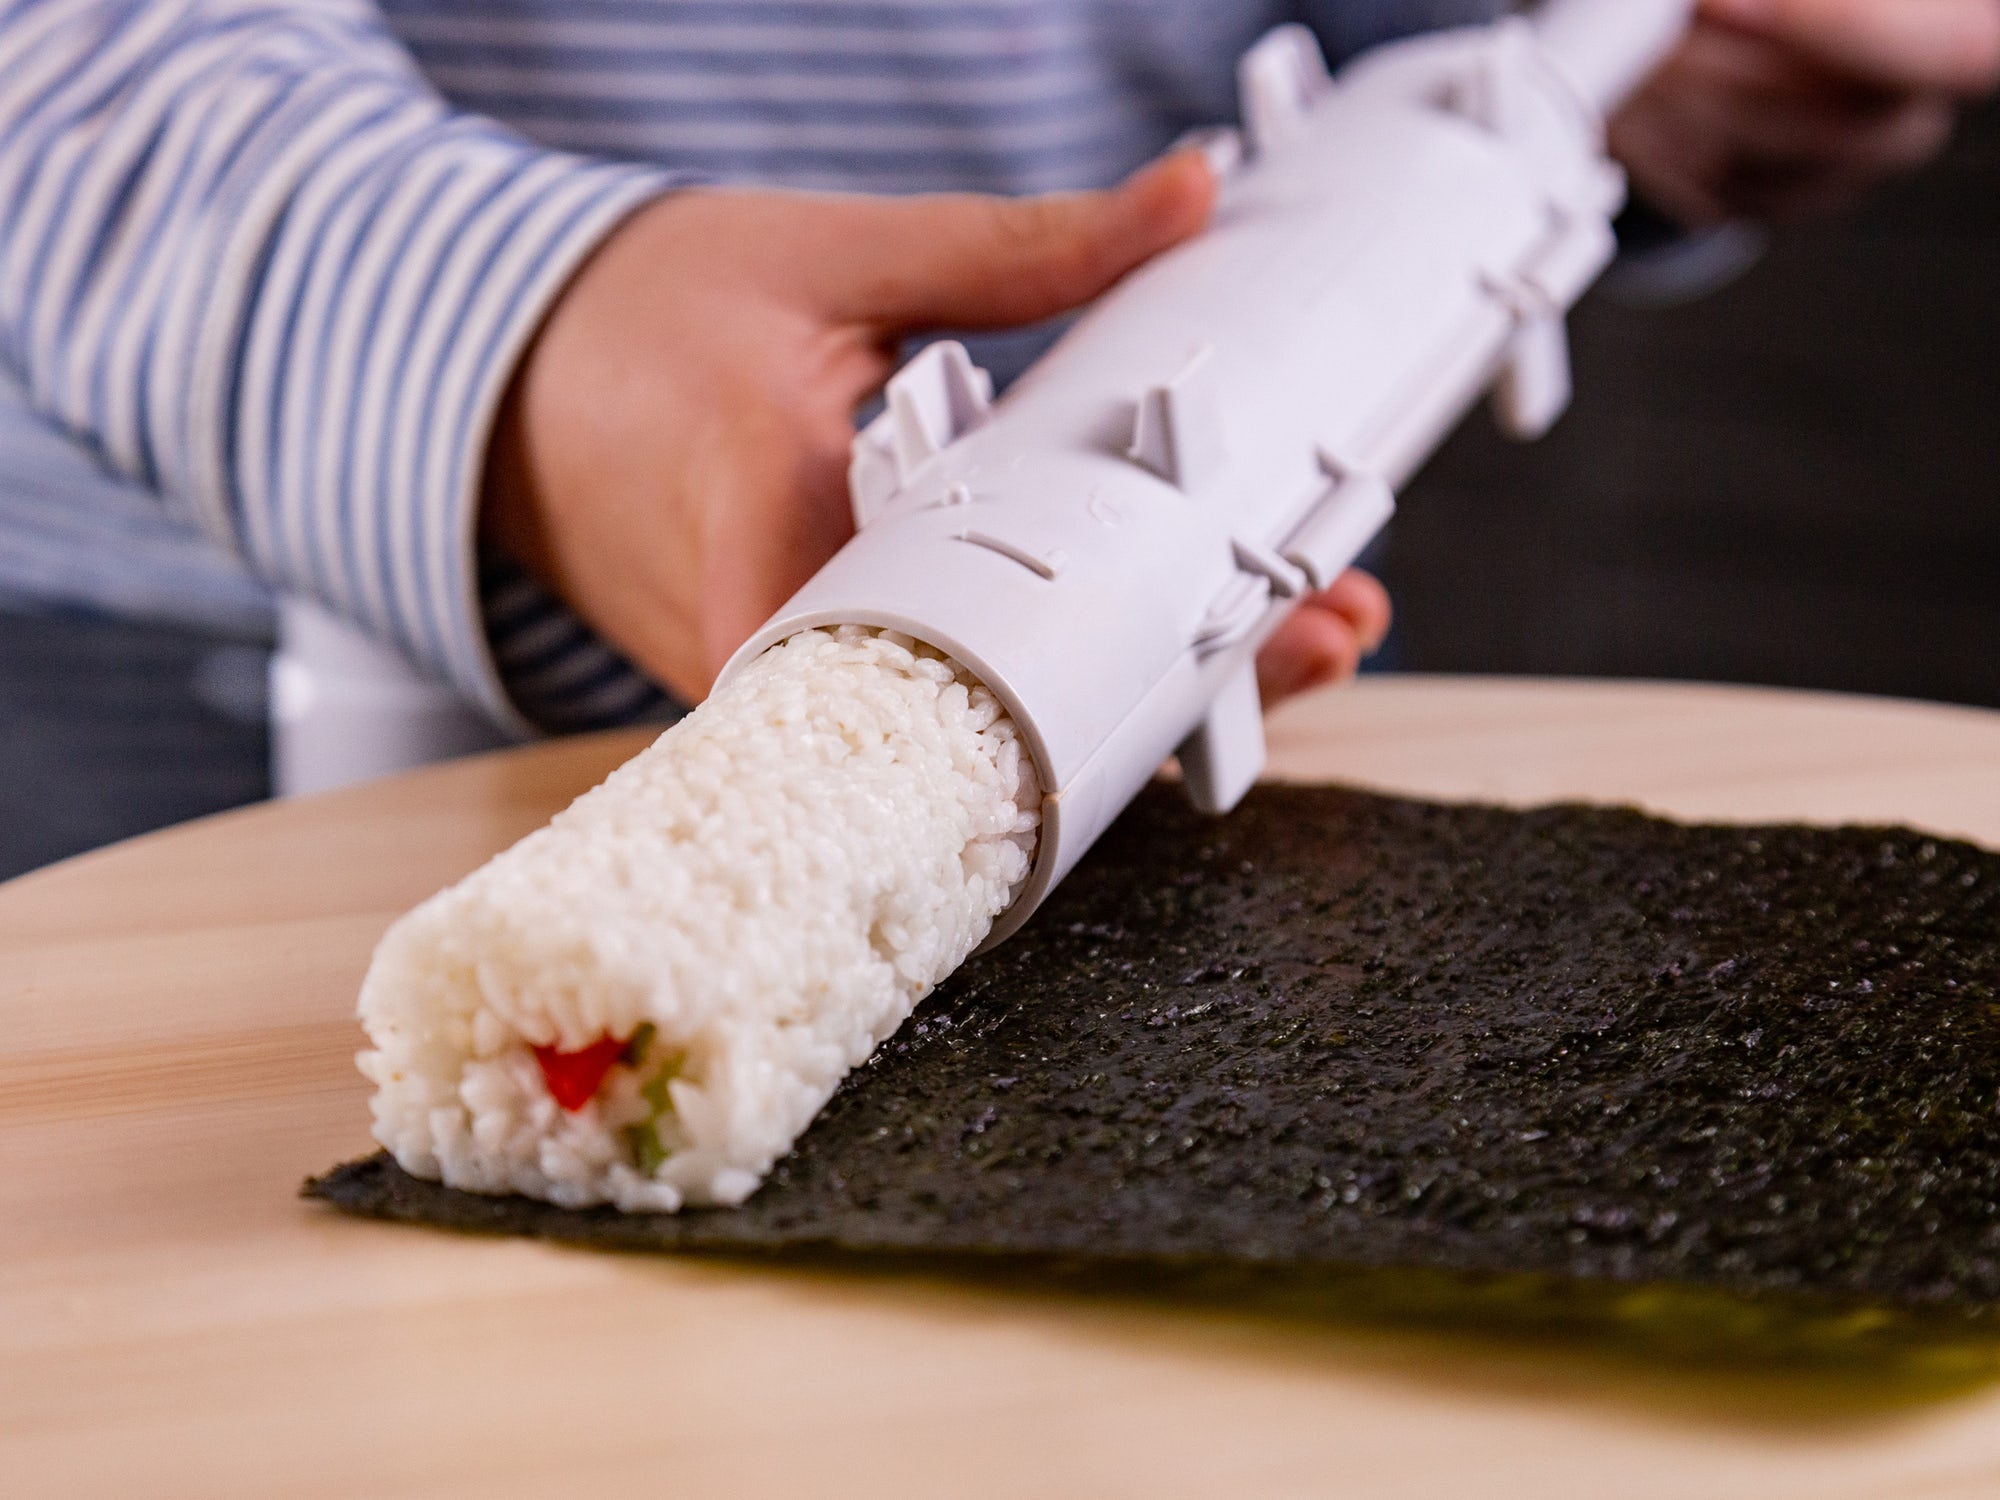 https://recipes.net/wp-content/uploads/2024/01/how-to-make-sushi-with-a-bazooka-1704528174.jpeg